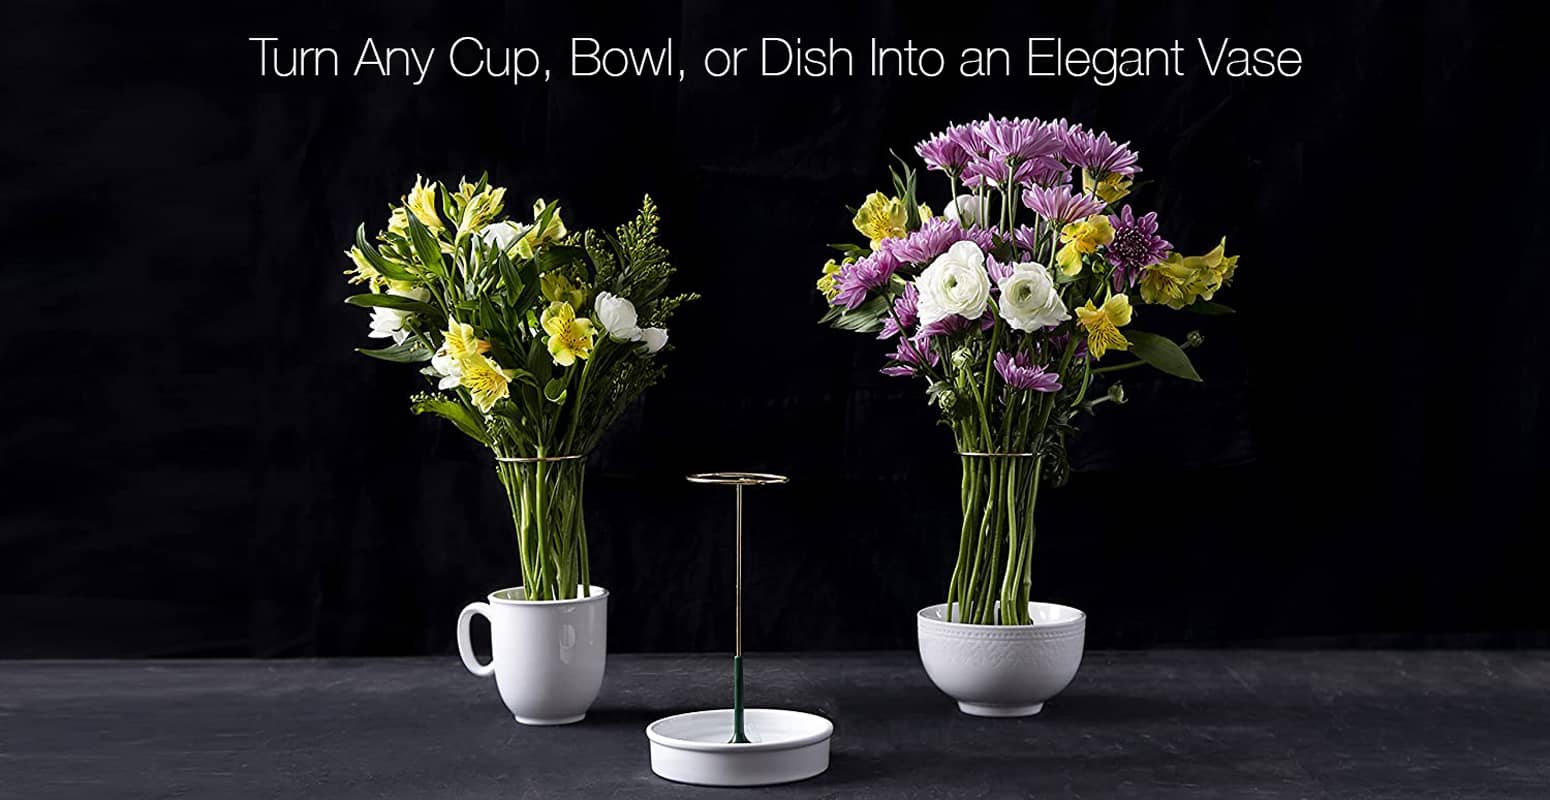 InvisiVase - Transforms Any Cup, Bowl, or Dish Into a Flower Vase